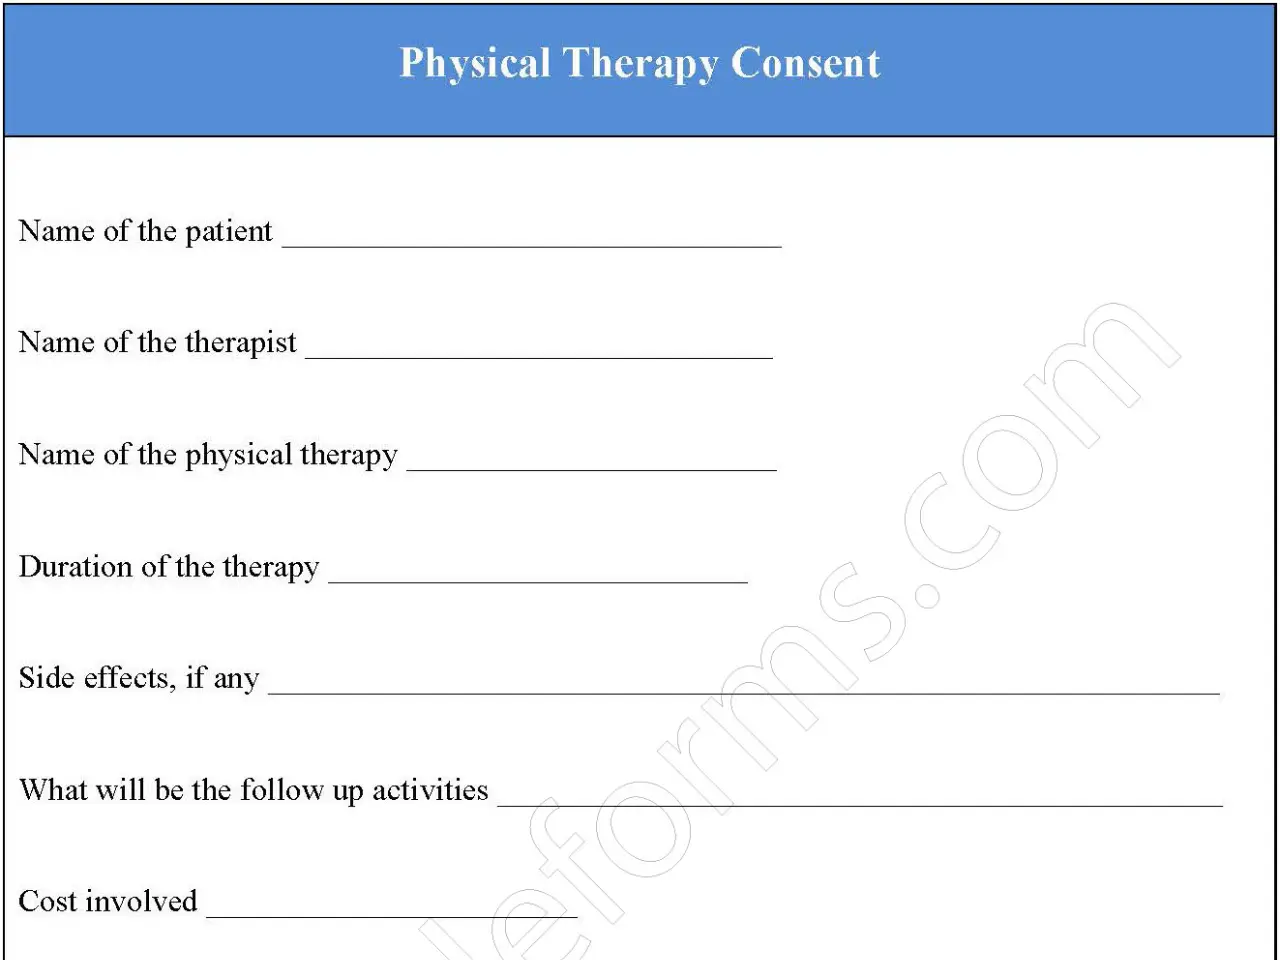 Physical therapy consent forms